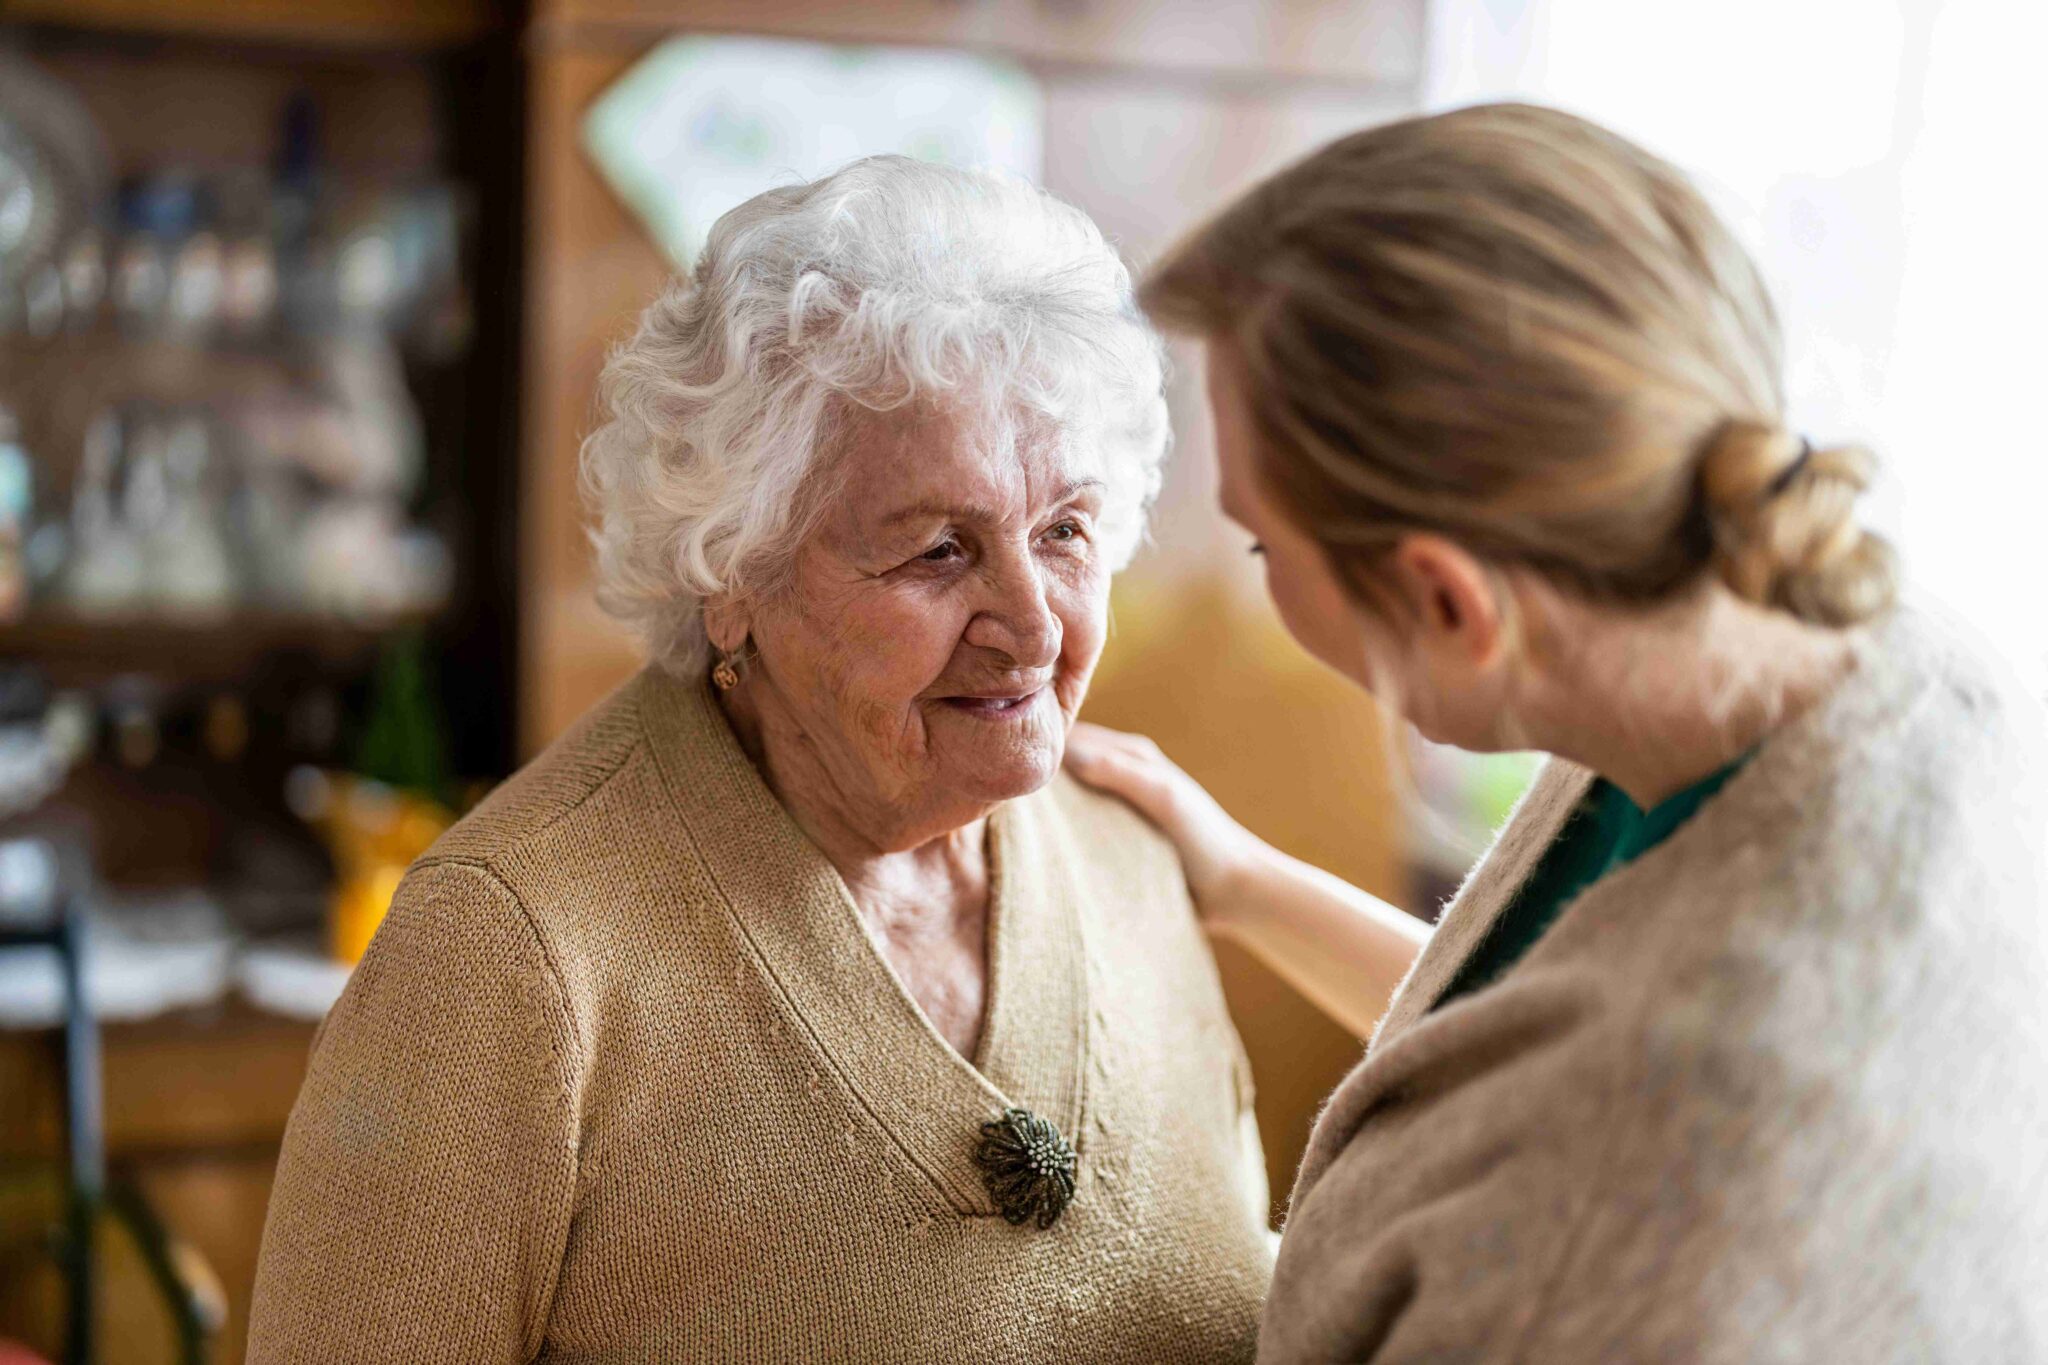 Mental Capacity Act - In Practice Course Image - Health visitor talking to a senior woman during home visit